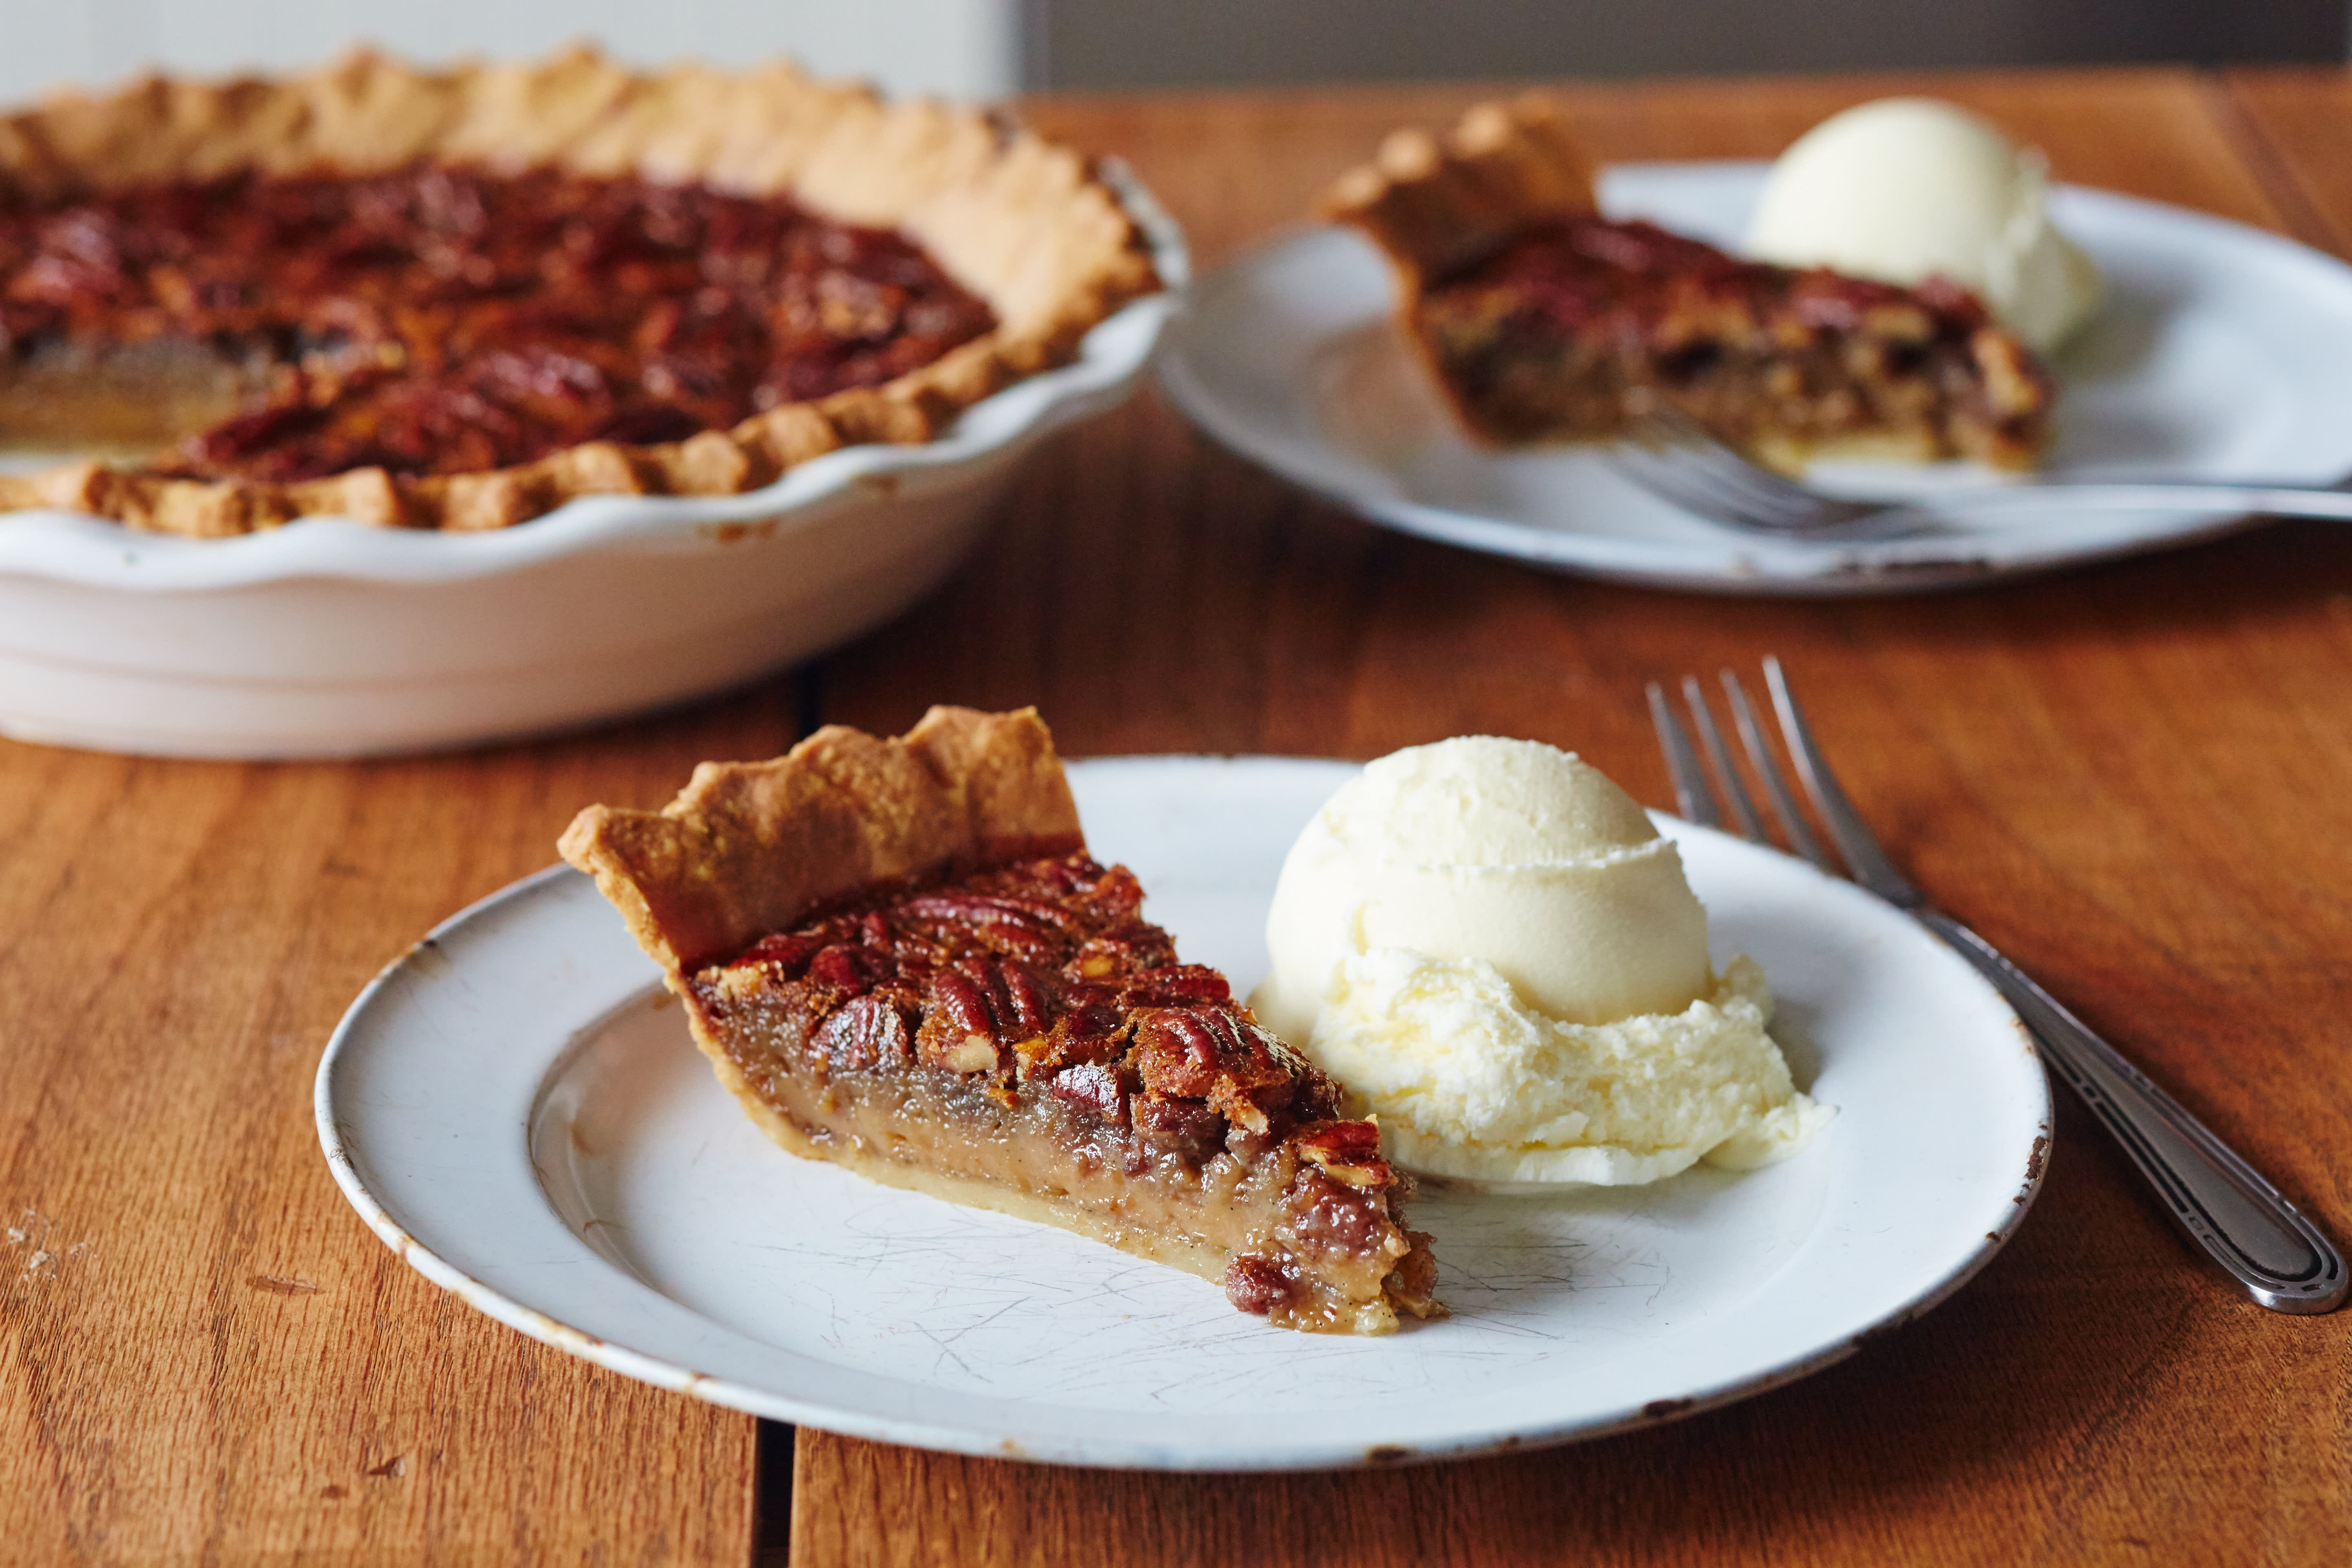 How To Make Classic Pecan Pie | Kitchn A Very Popular Baked Pastry In North America